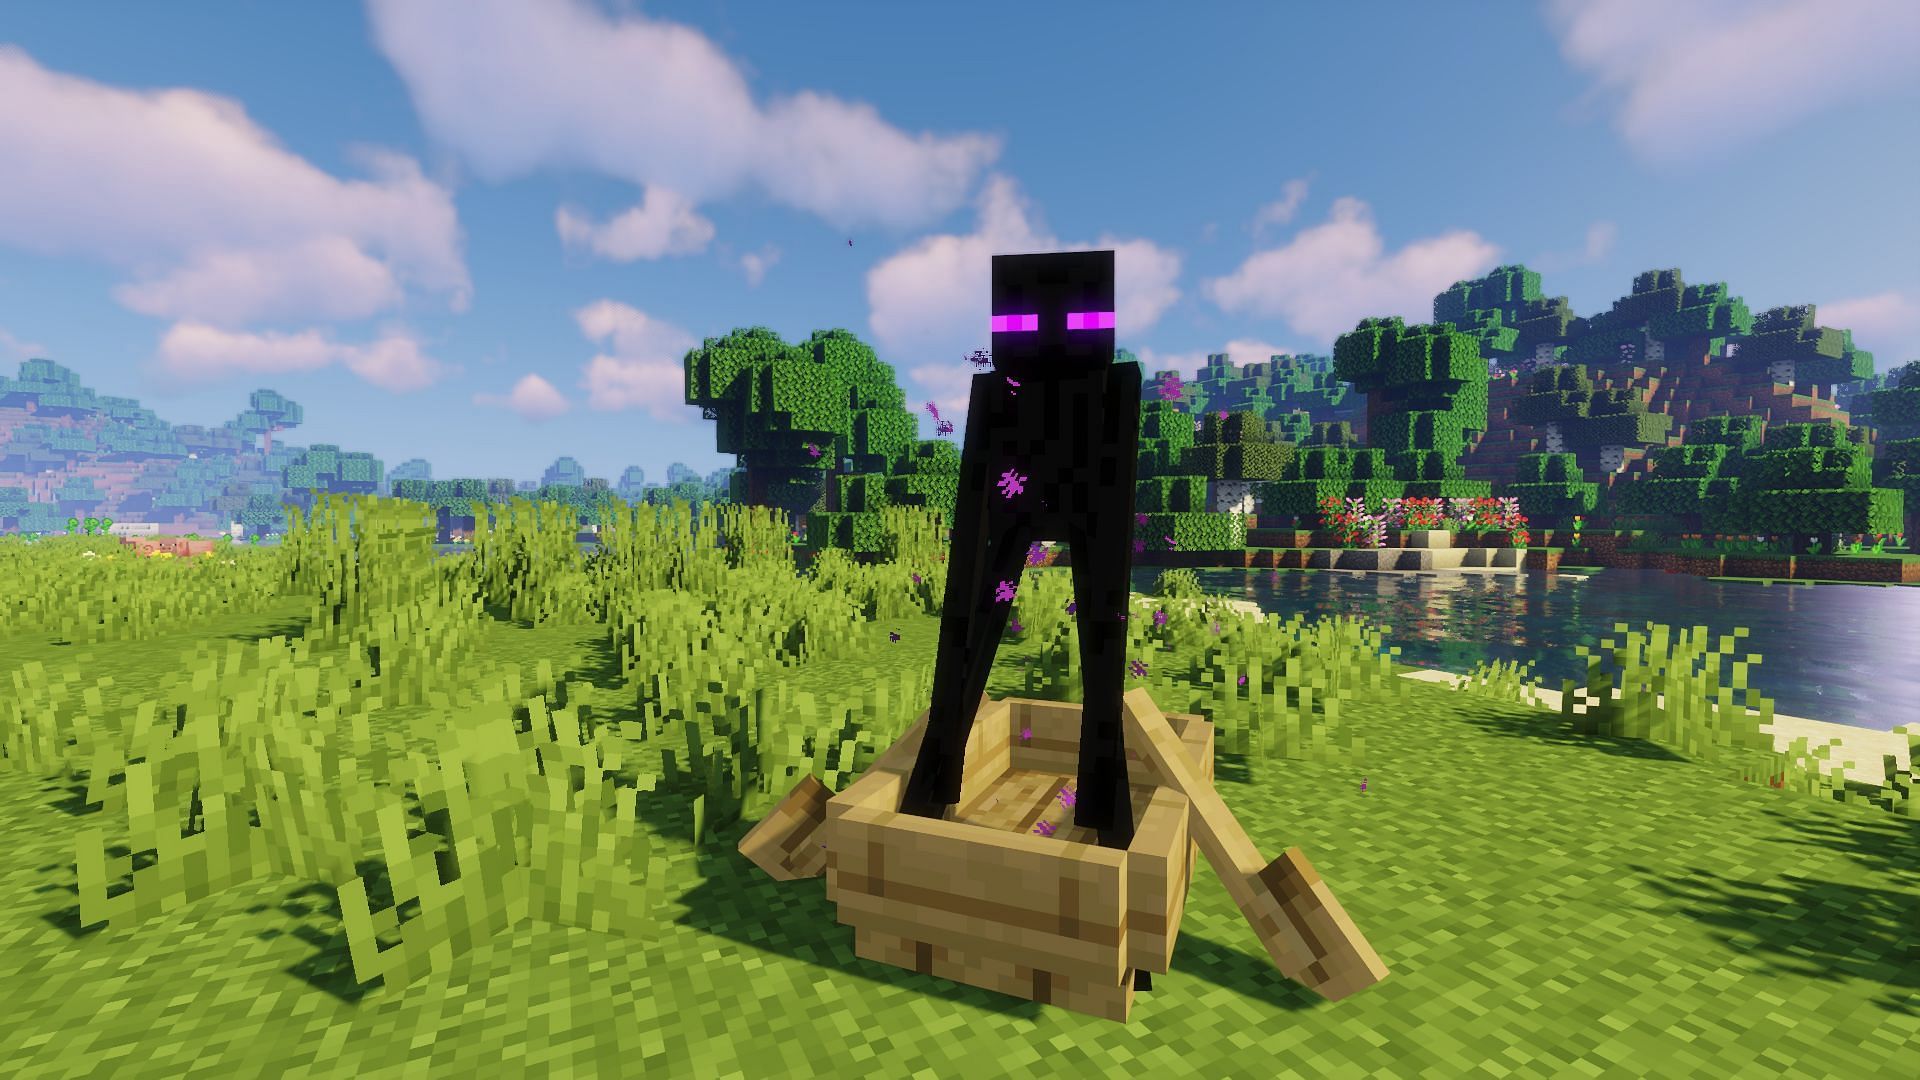 An enderman trapped in a boat, exclusive to Java edition (Image via Minecraft)